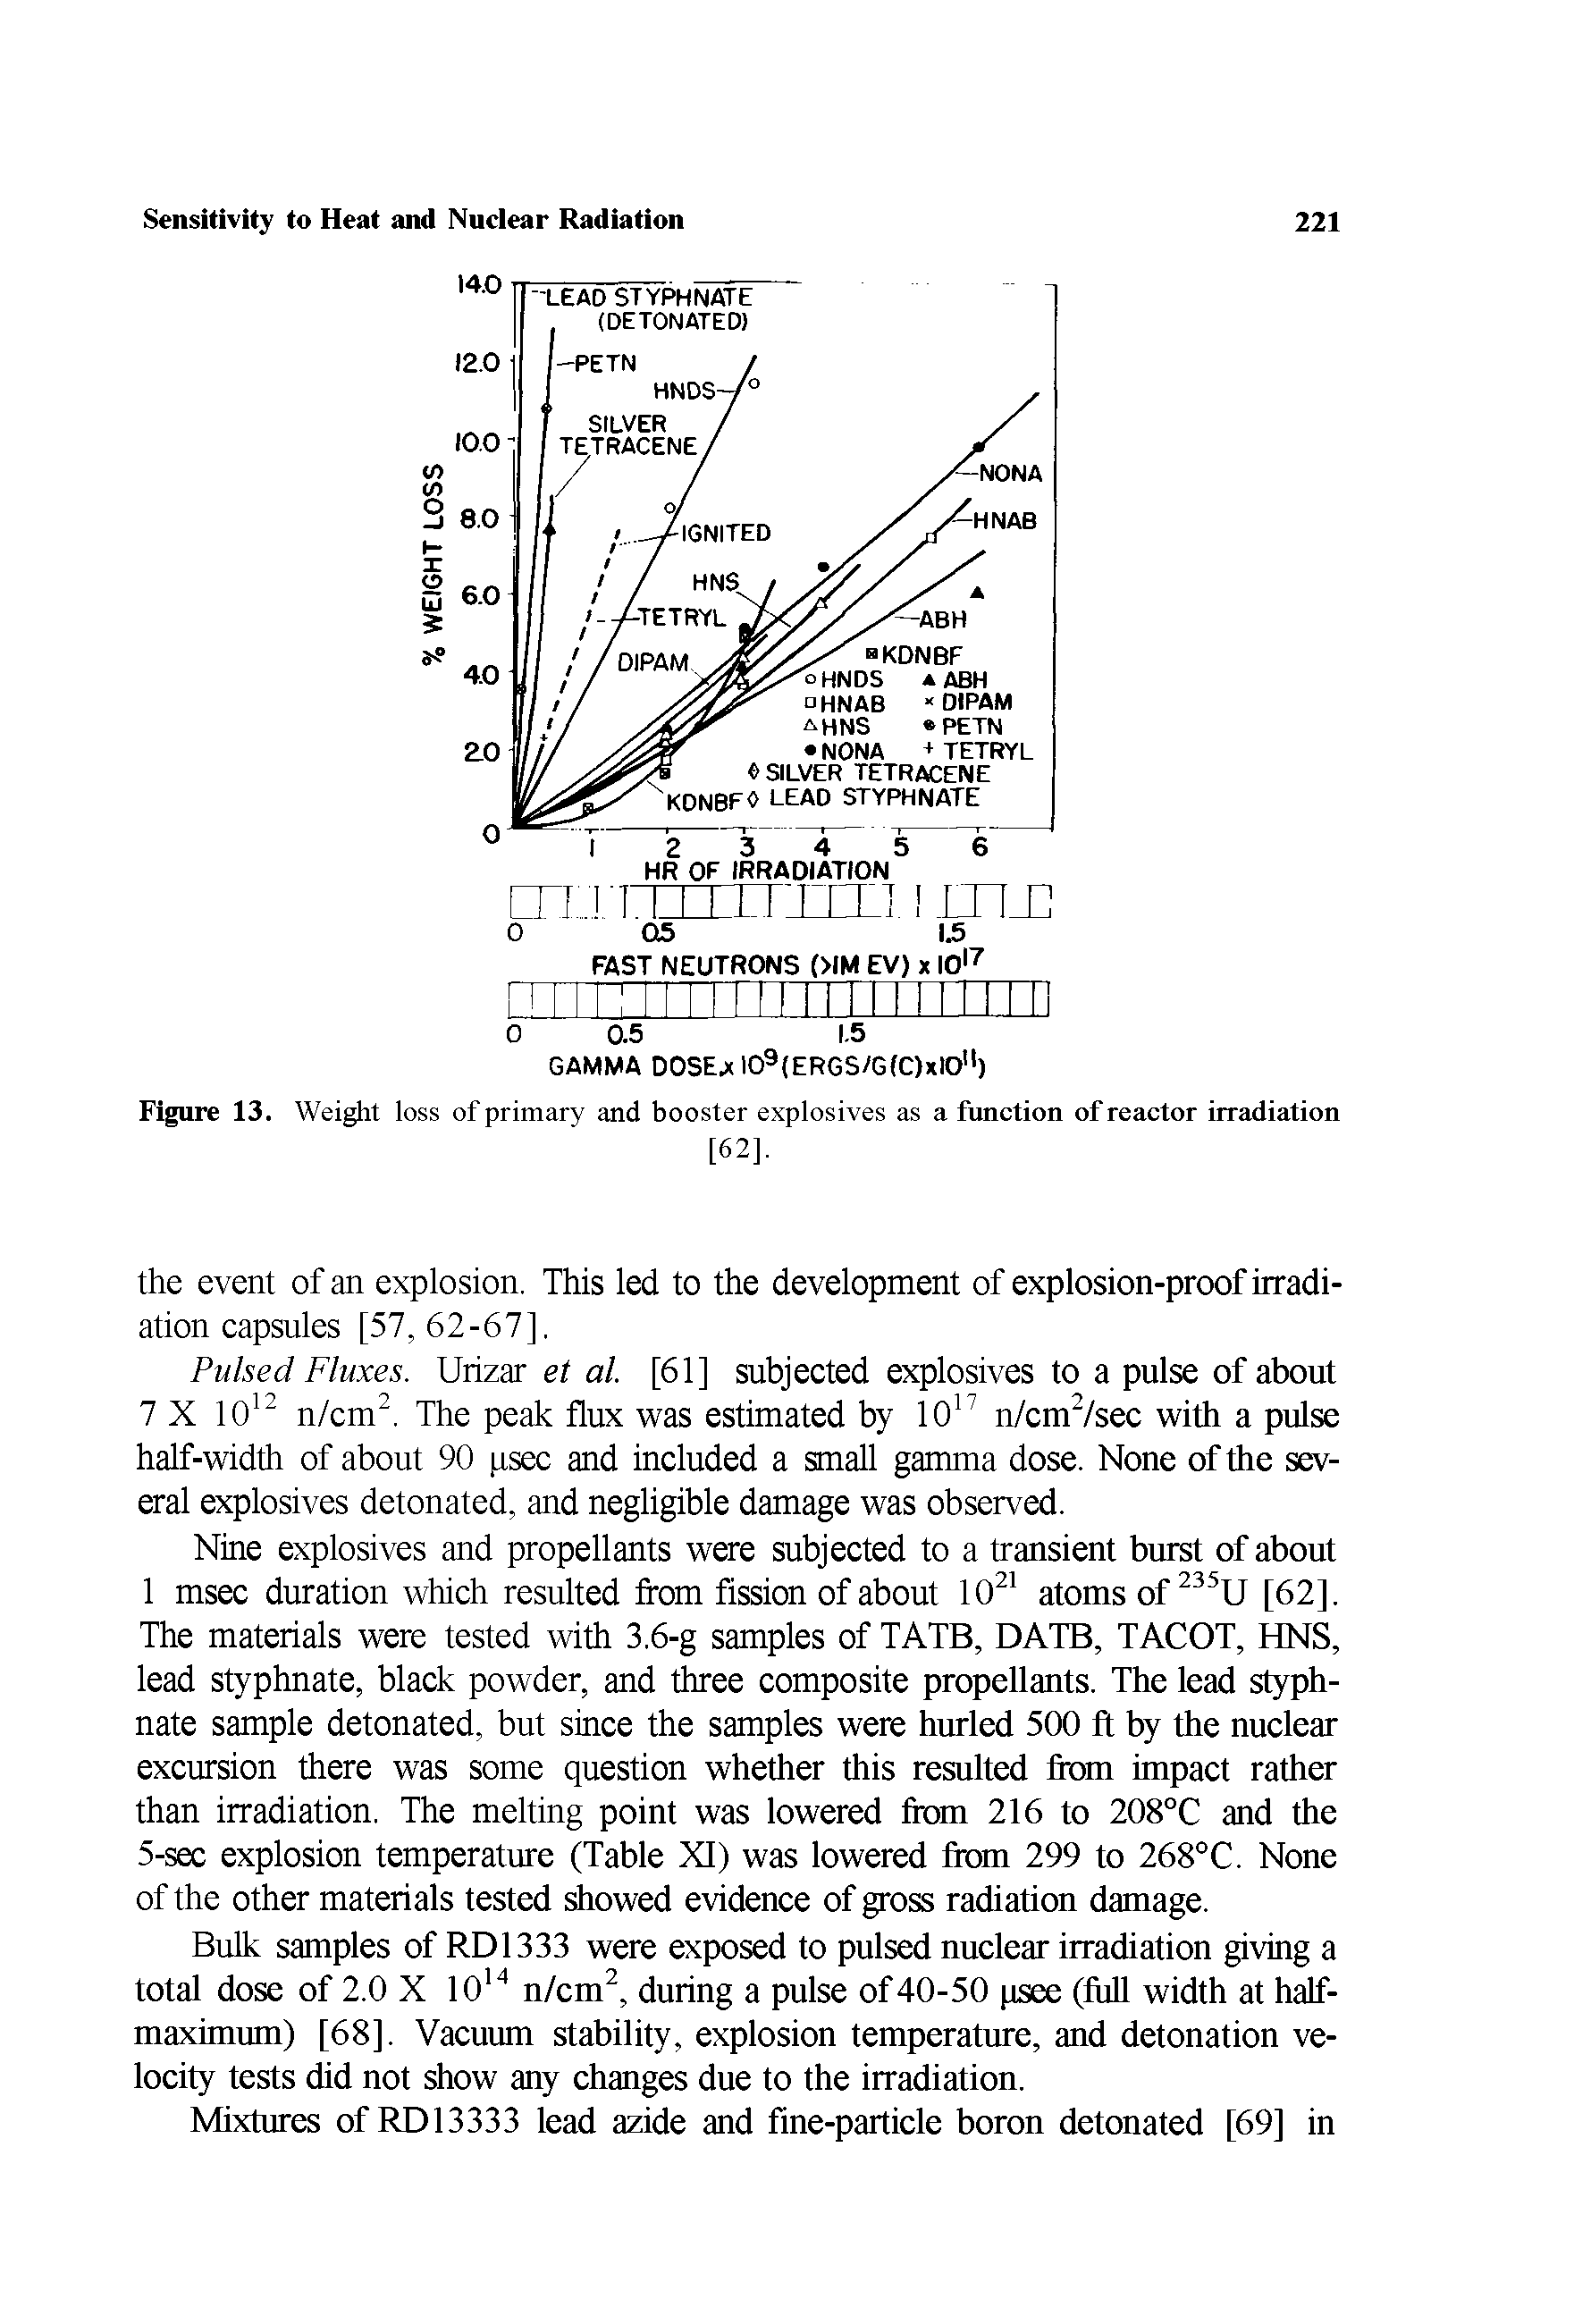 Figure 13. Weiglit loss of primary and booster explosives as a function of reactor irradiation [62].